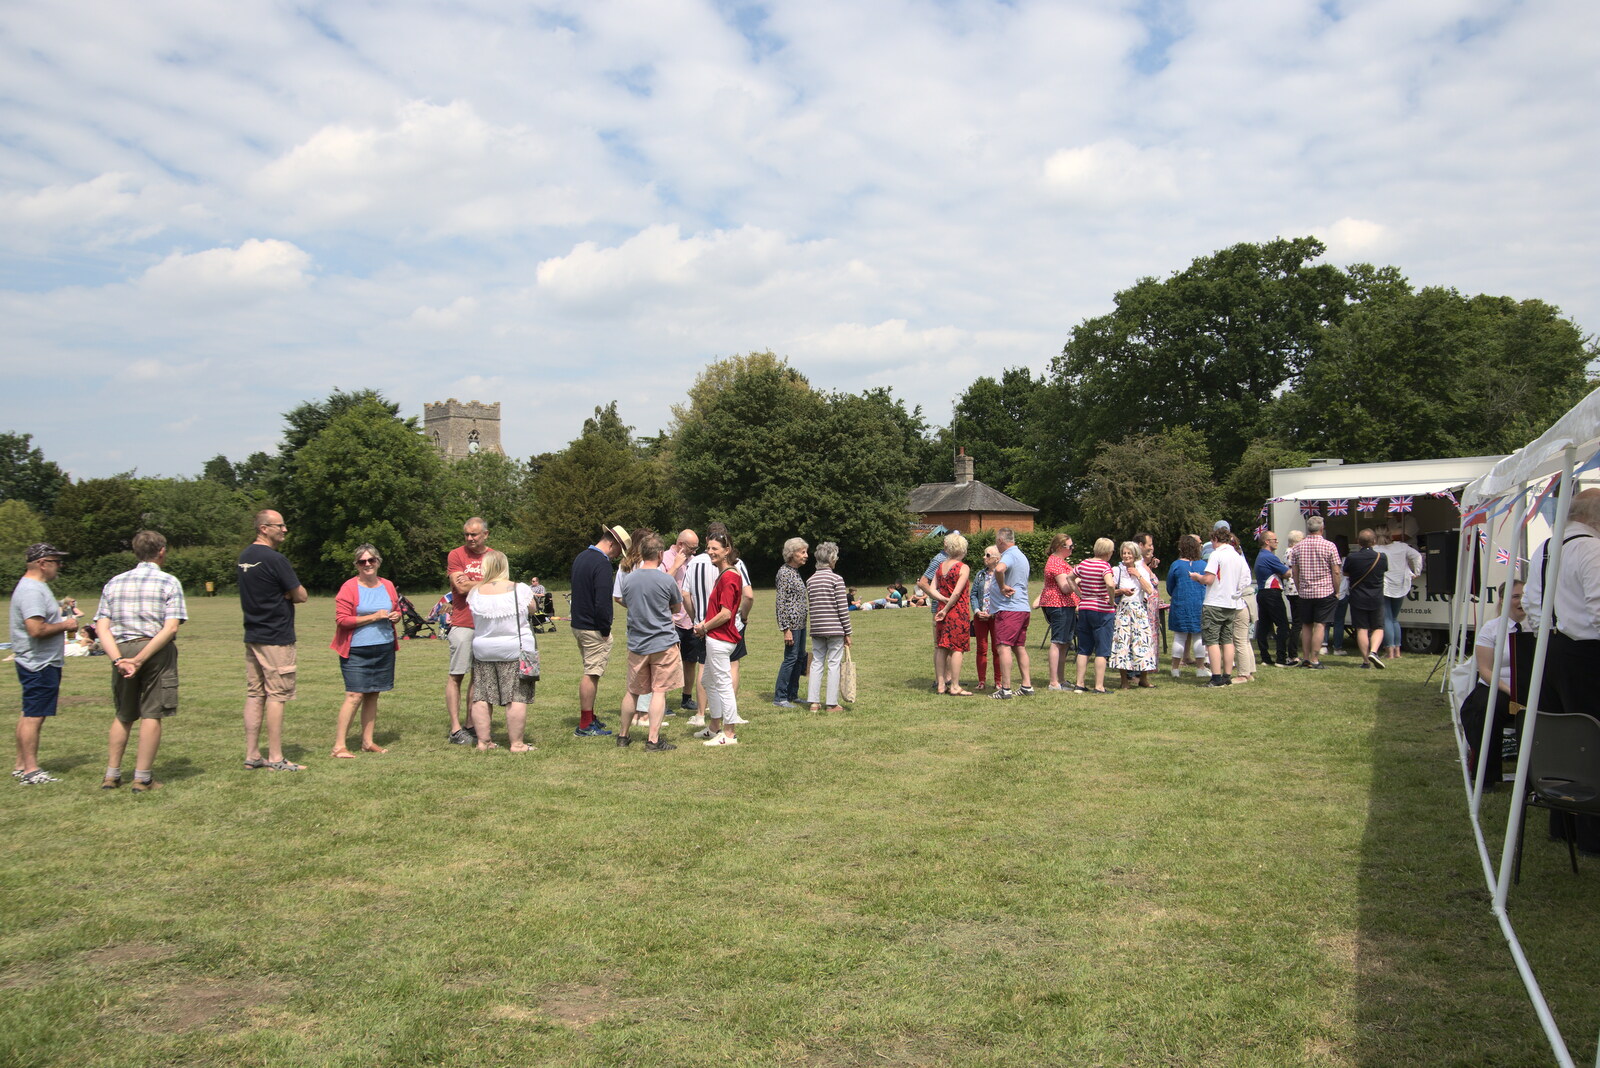 There's a massive queue for the hog roast from The Gislingham Silver Band at Barningham, Suffolk - 3rd June 2022